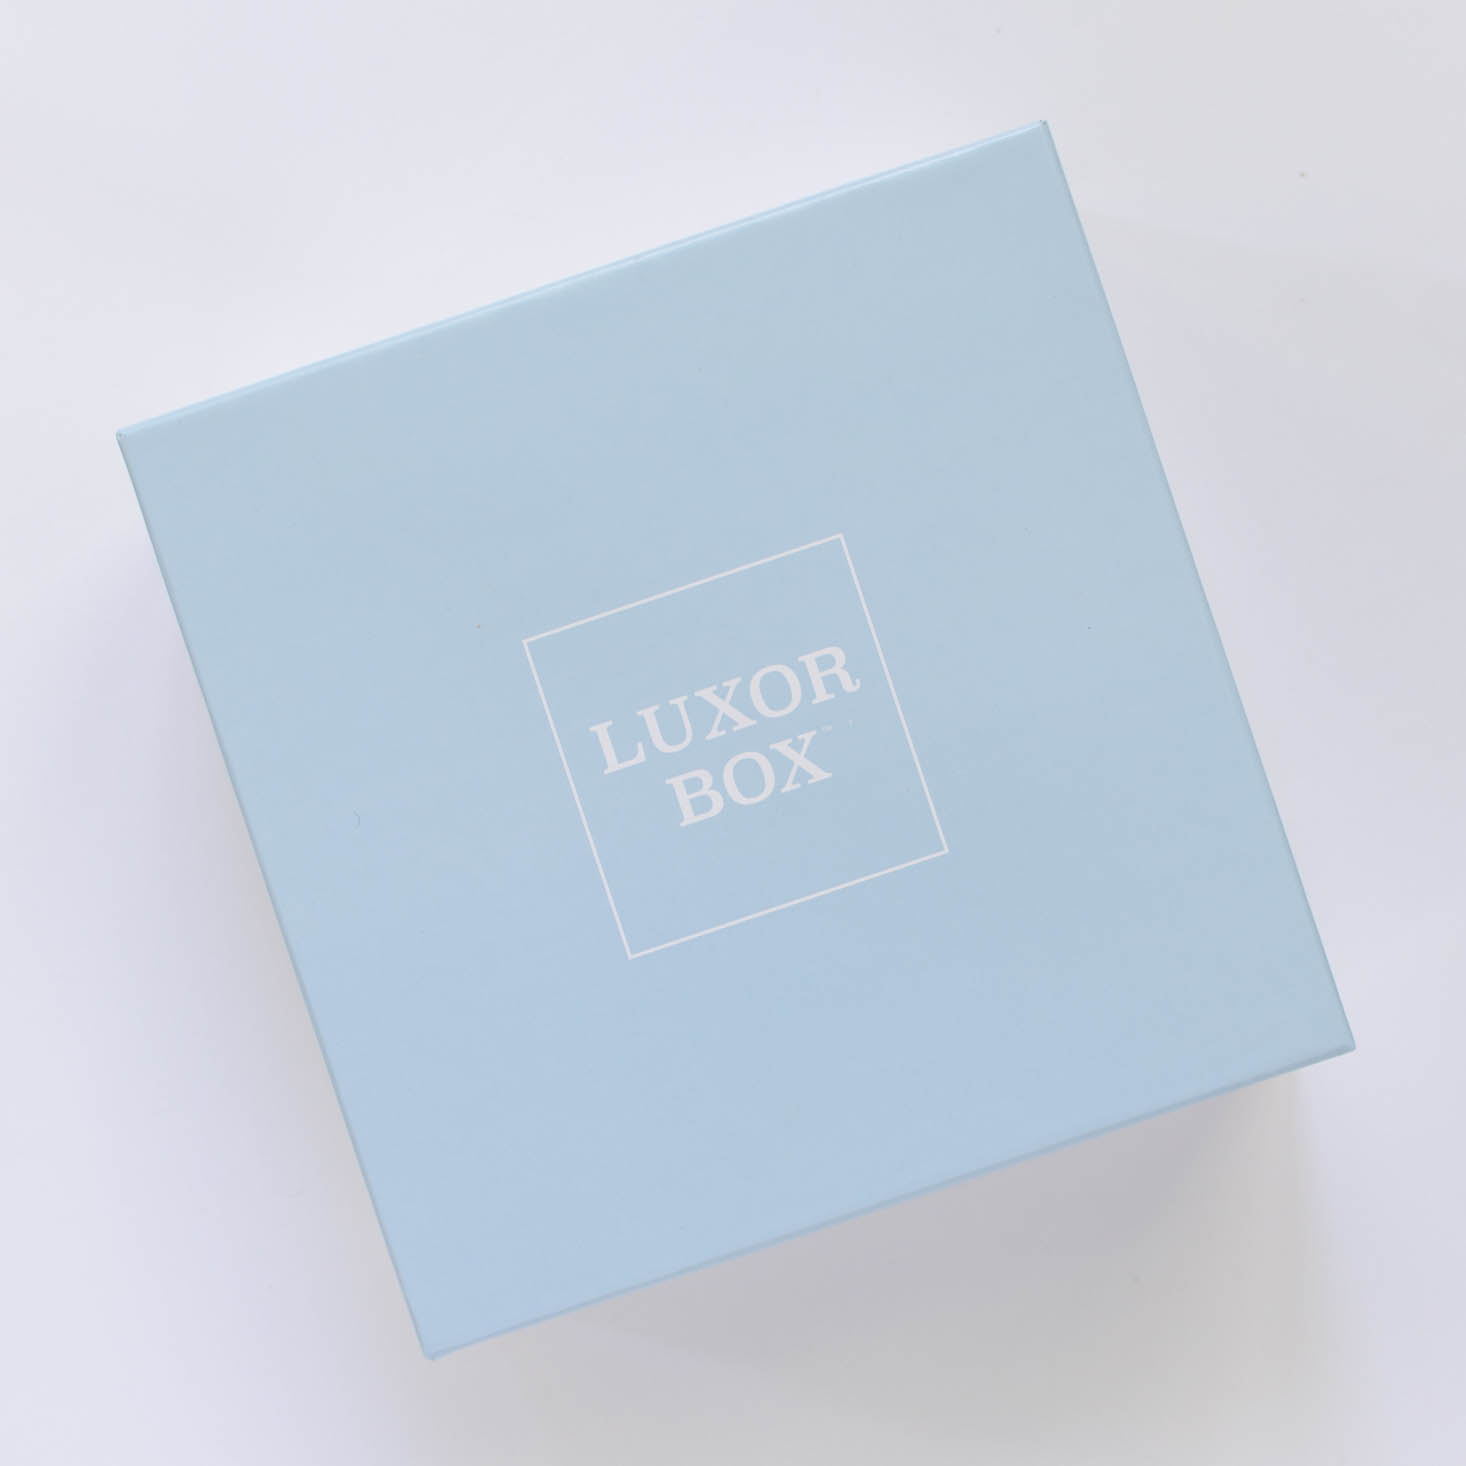 Luxor Box Subscription Box Review – September 2016